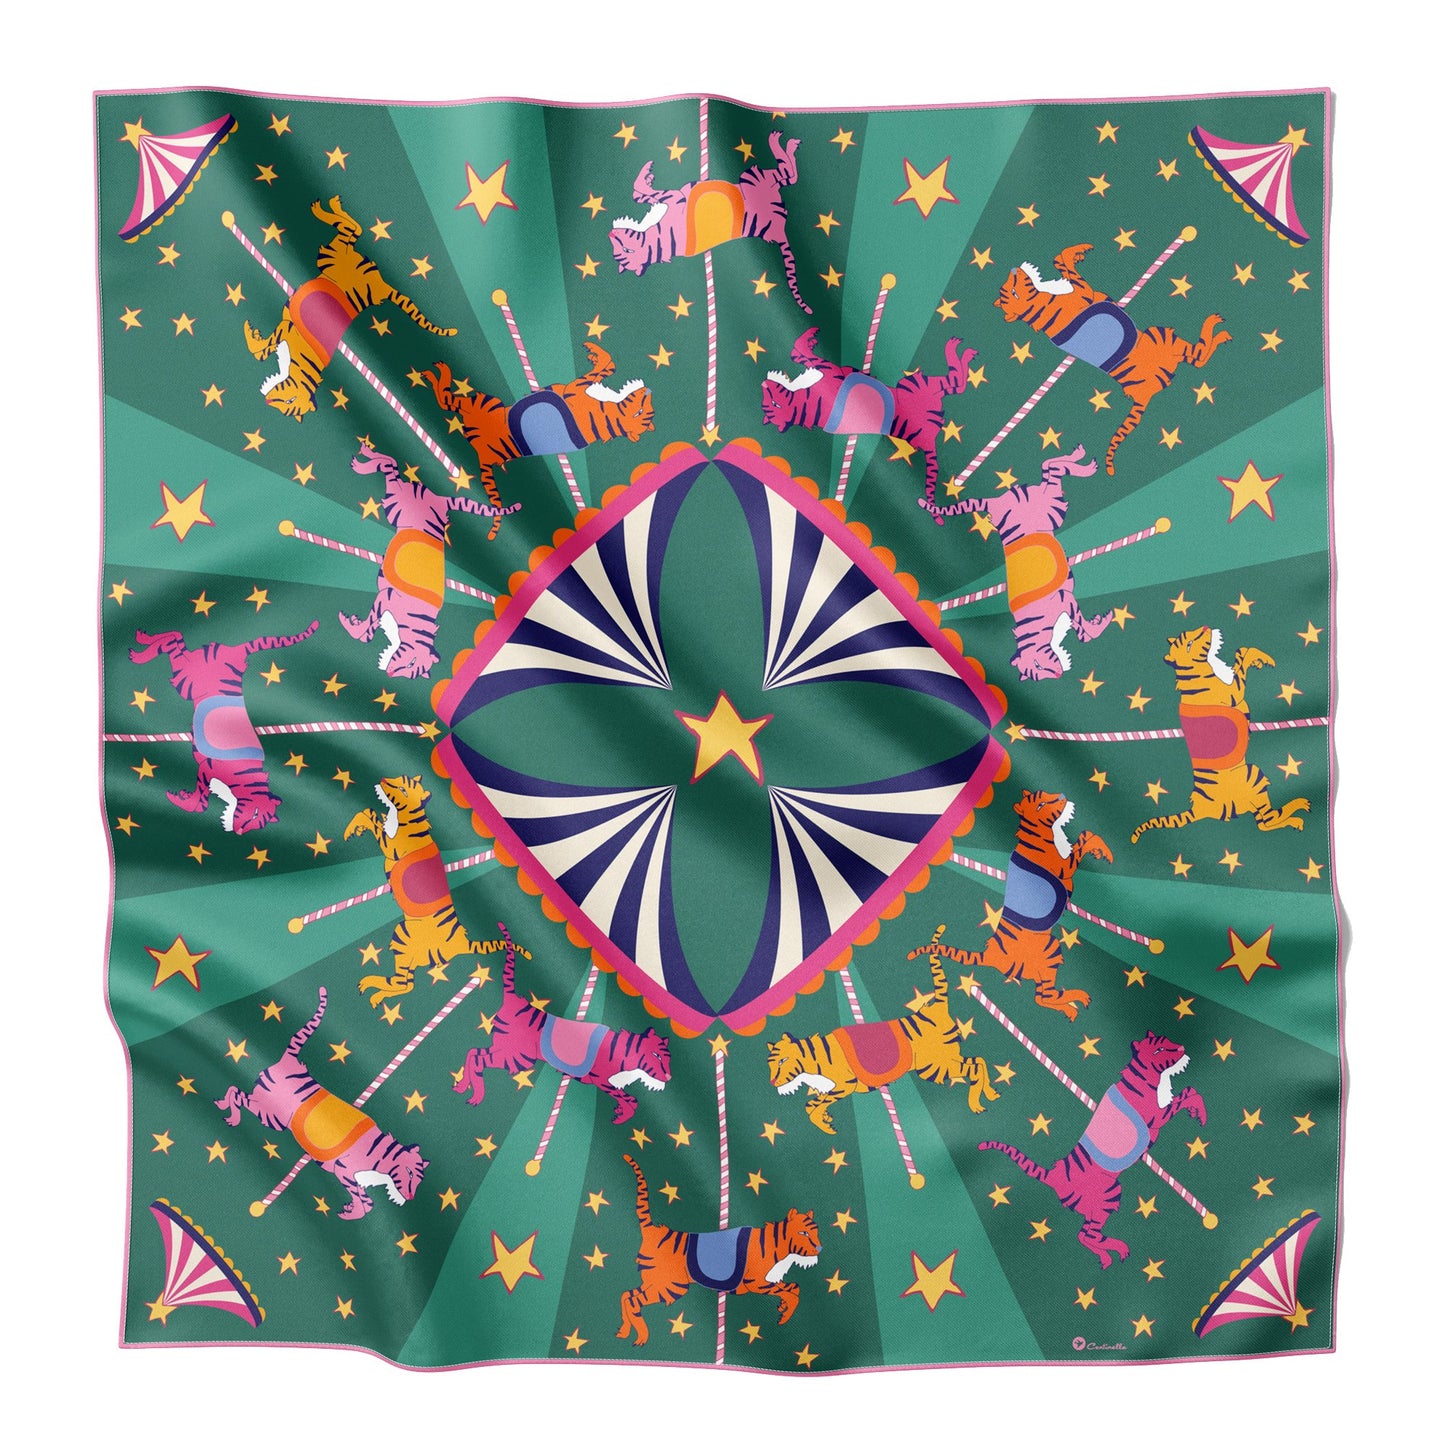 Green silk scarf with stars and tiger carousel.